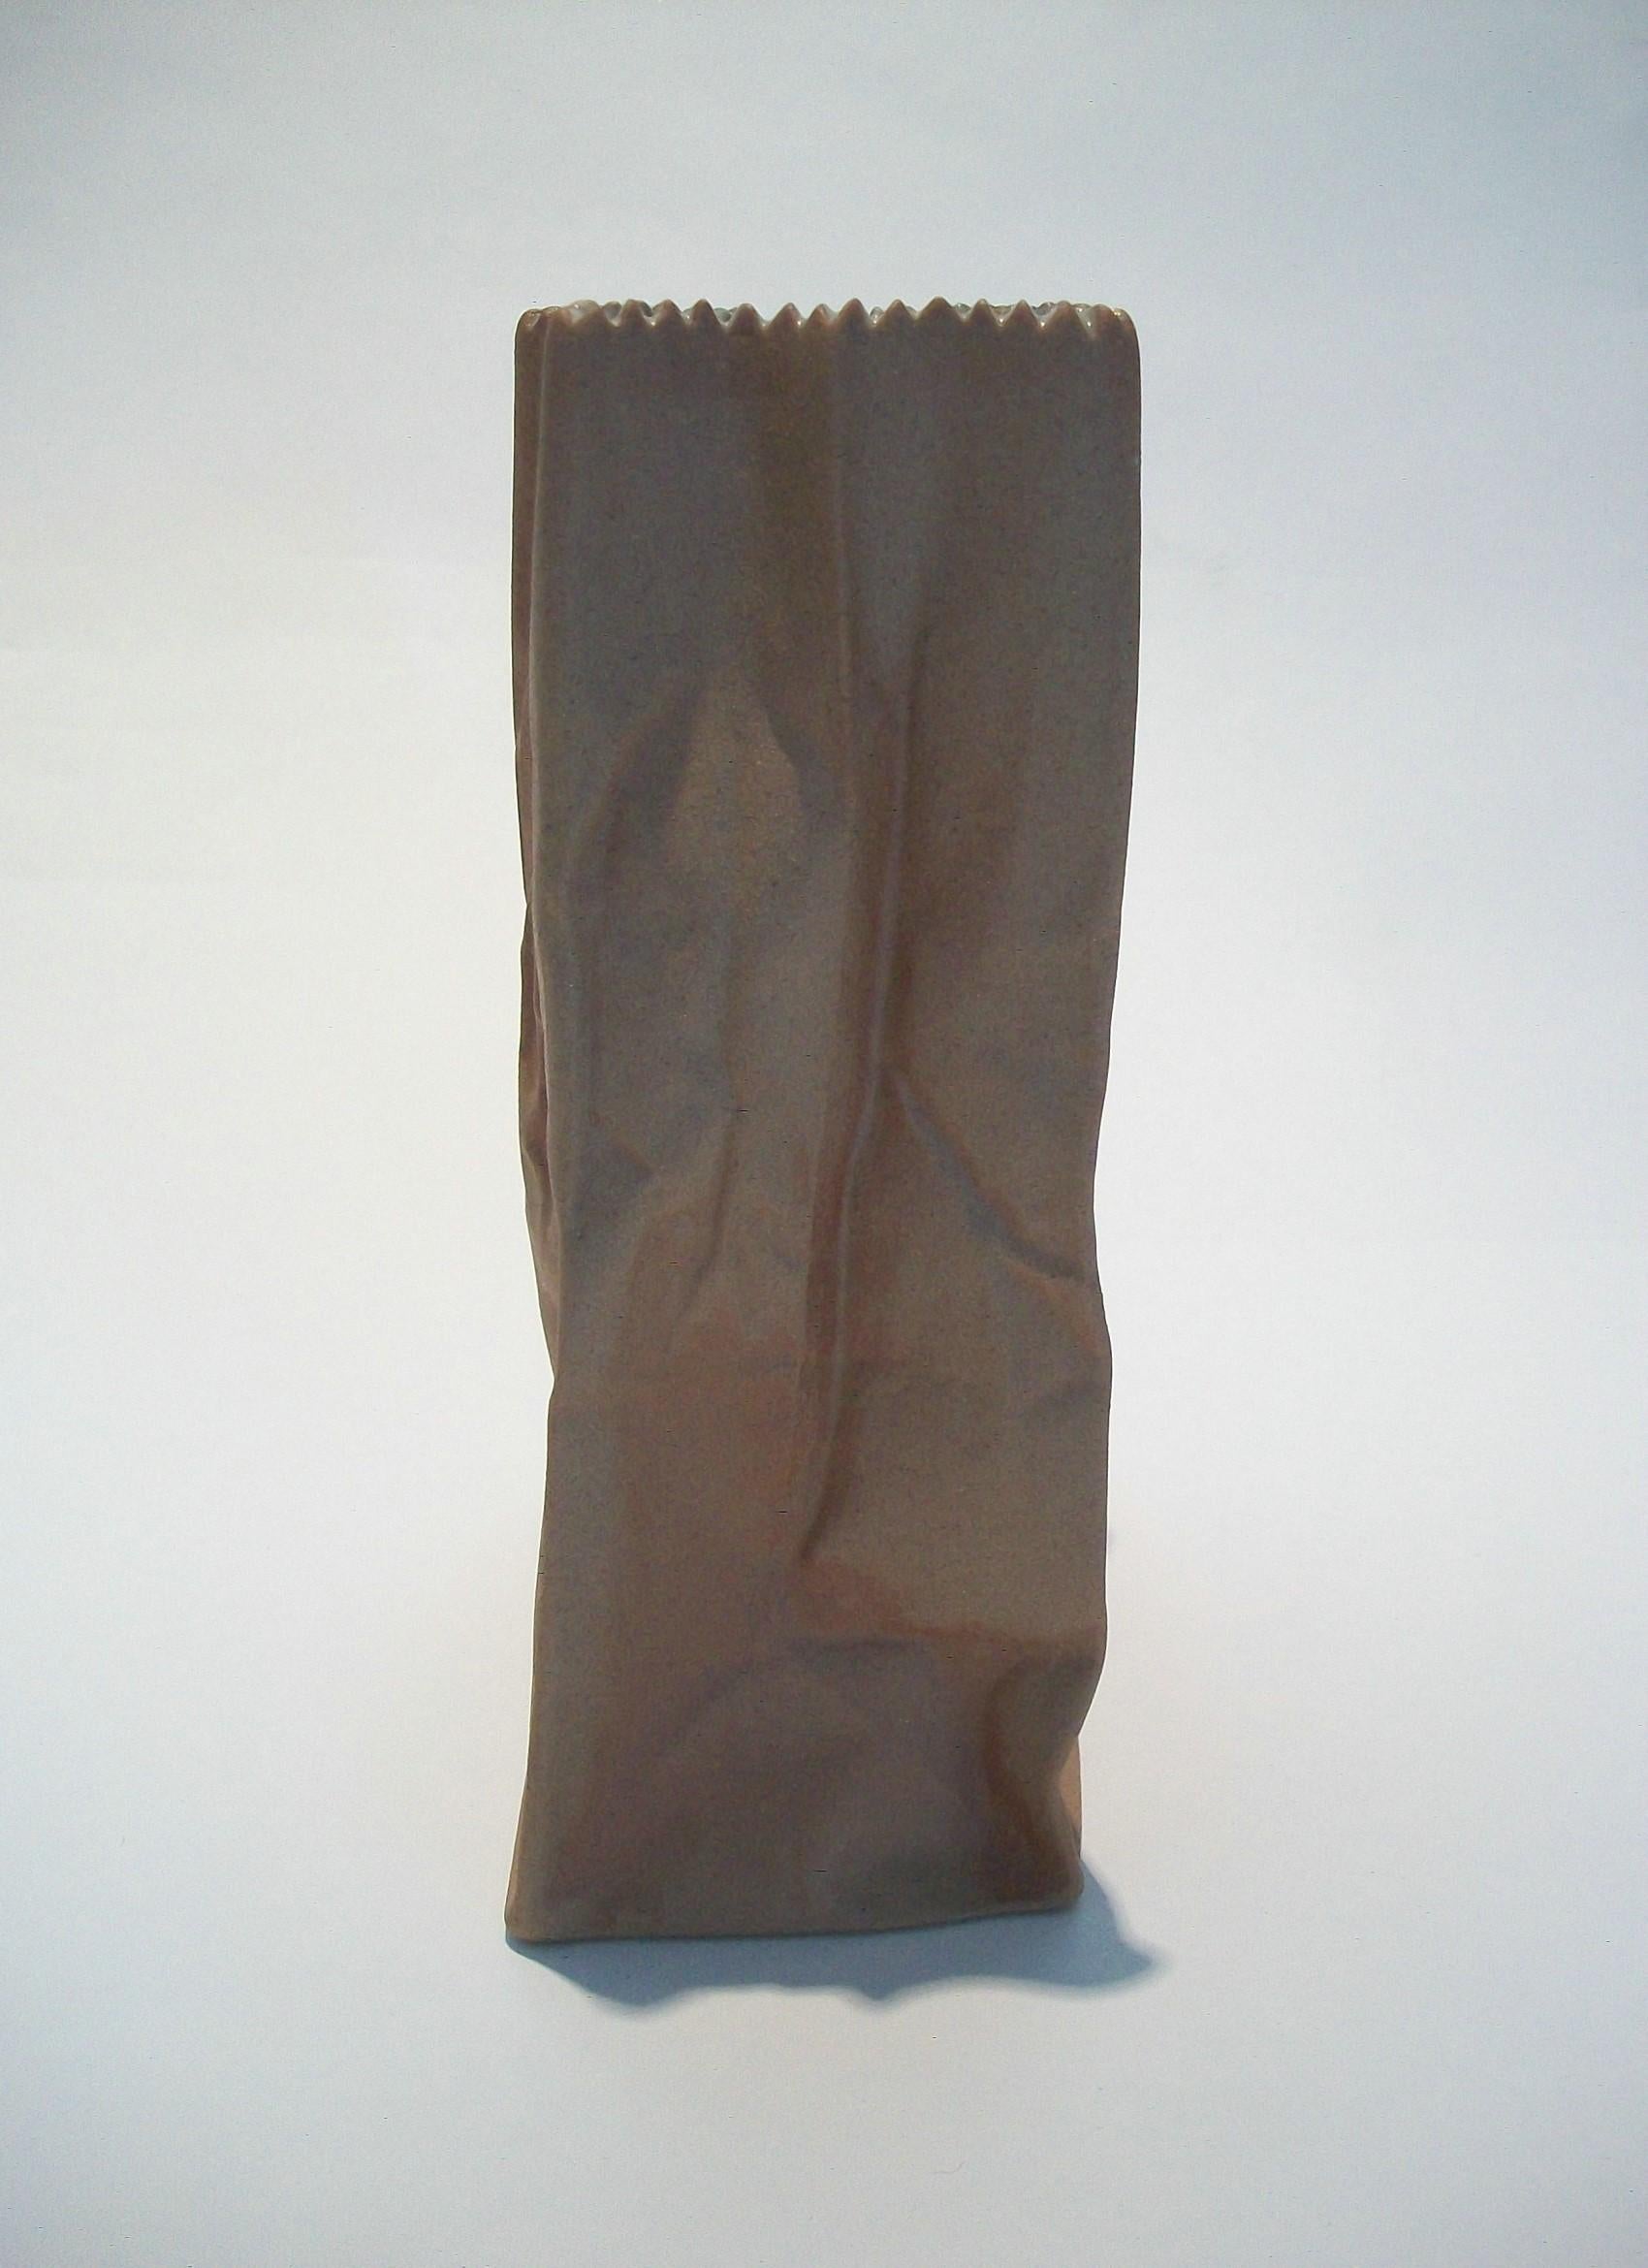 ROSENTHAL - Tapio Wirkkala - Porcelain 'Paper Bag' Vase - Germany - Circa 1977 In Good Condition For Sale In Chatham, ON